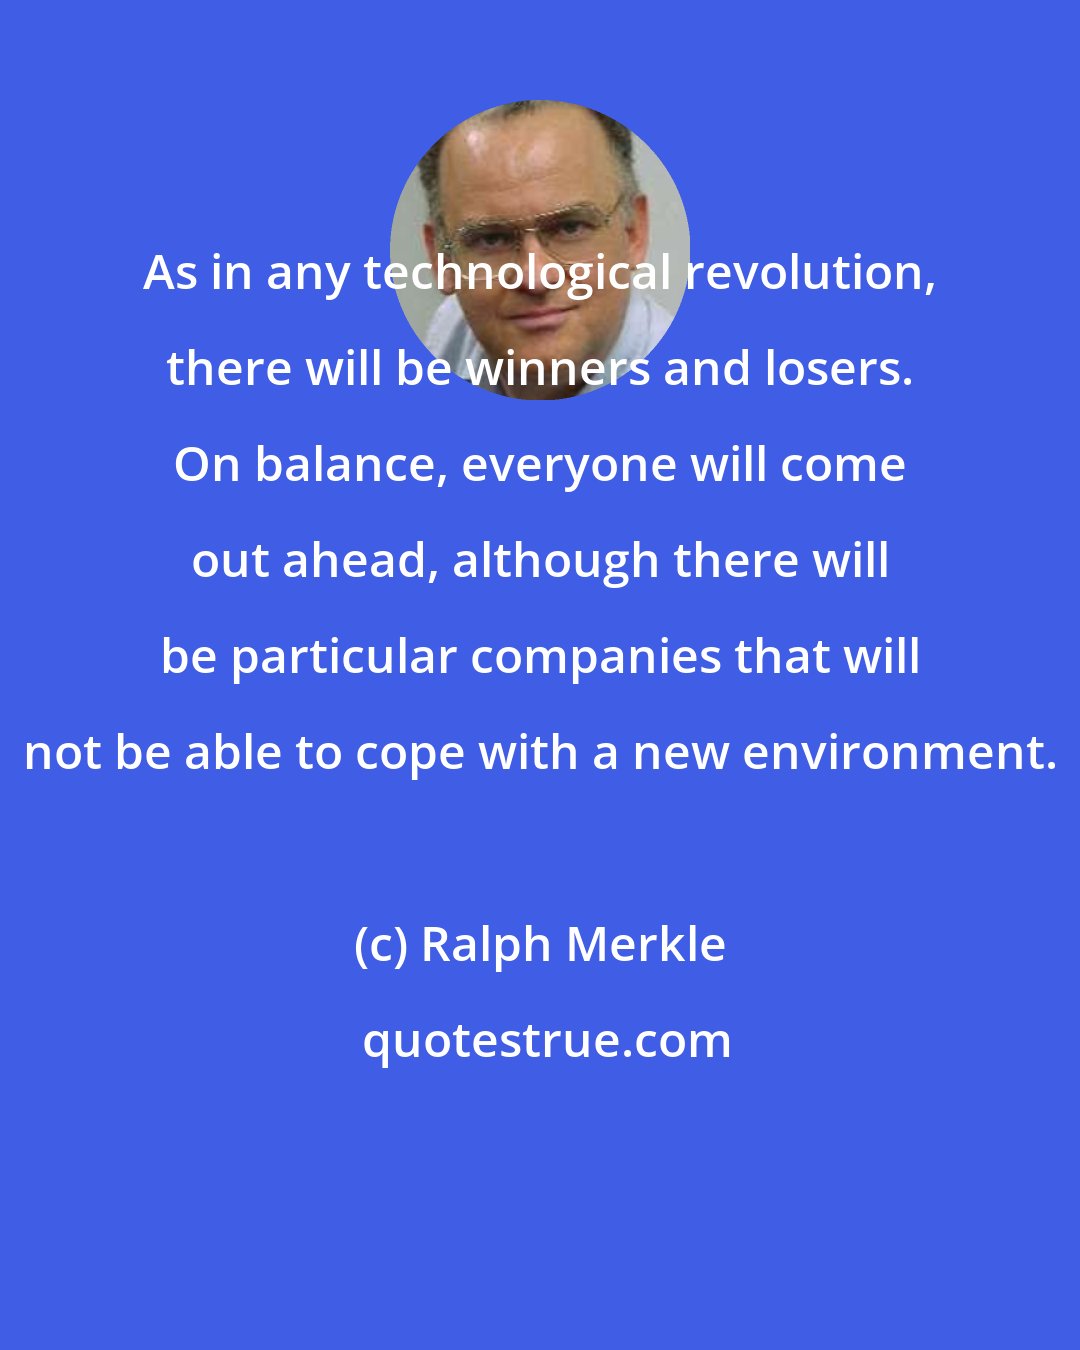 Ralph Merkle: As in any technological revolution, there will be winners and losers. On balance, everyone will come out ahead, although there will be particular companies that will not be able to cope with a new environment.